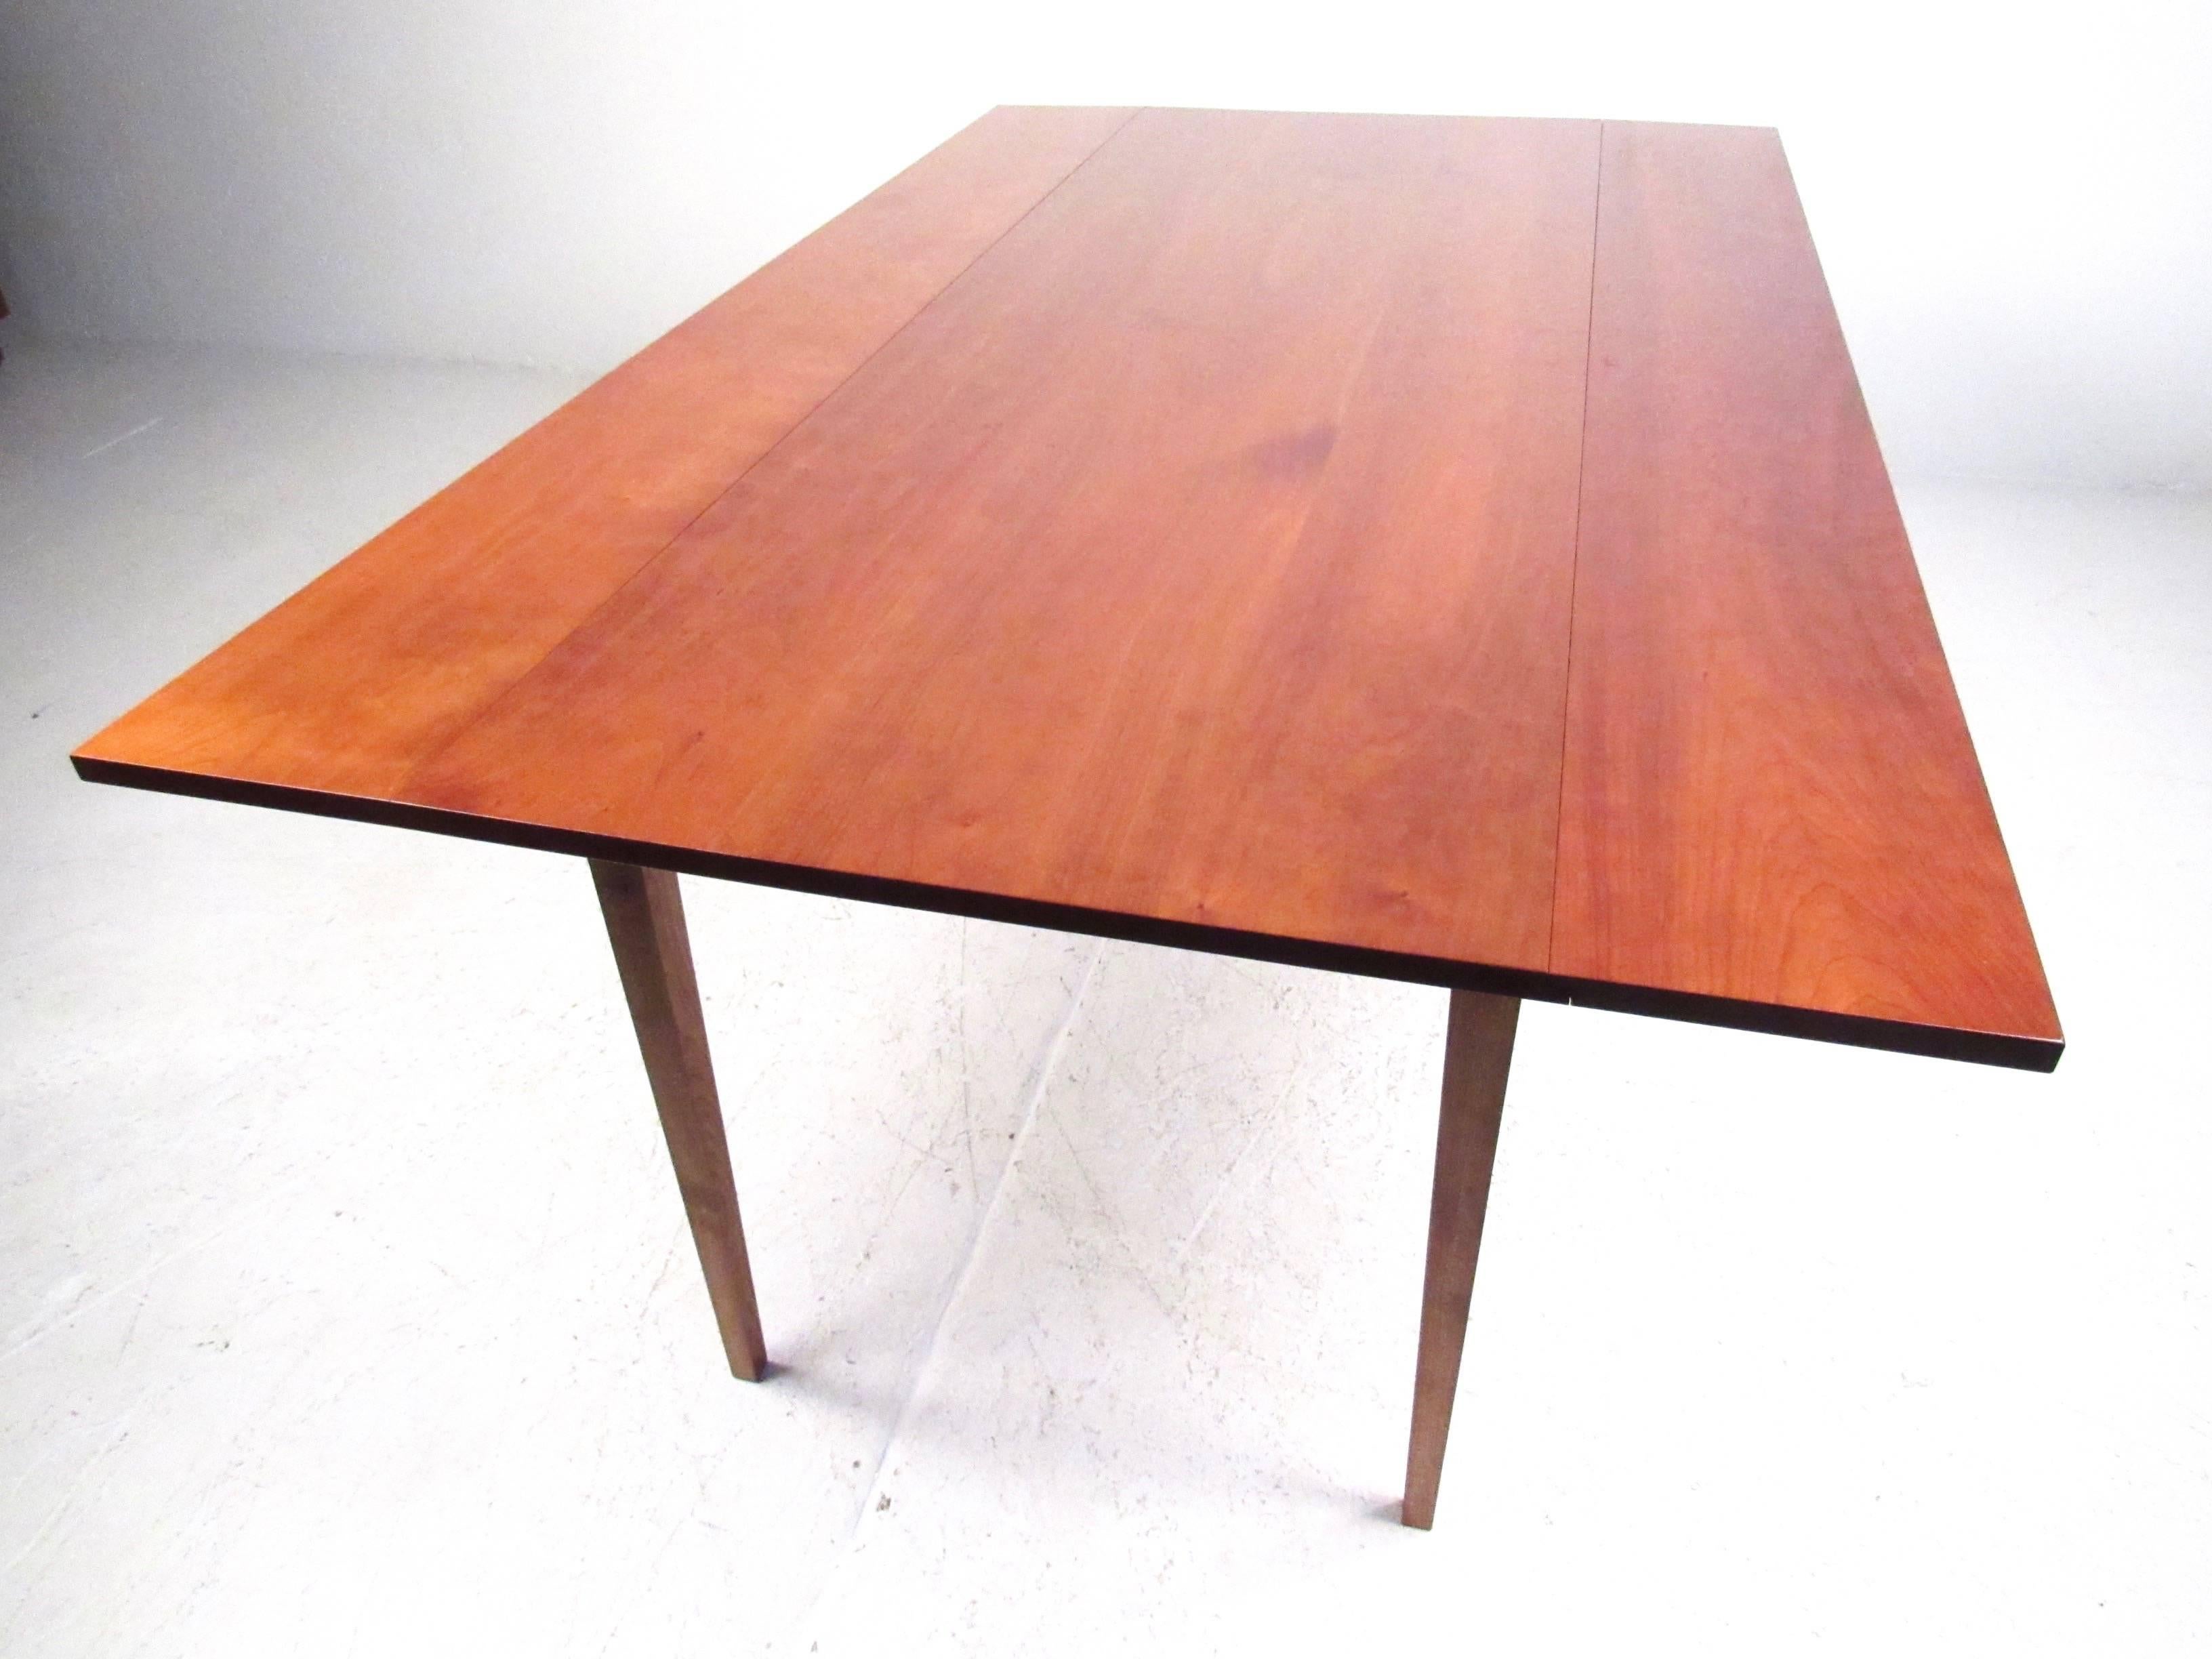 This stylish cherrywood table features exquisite yet simplistic design, with versatile drop leaf function. Ideal table for tight spaces or apartment use . Measures: the 27 inch depth of the table expands to 44 with the leaves opened. Please confirm